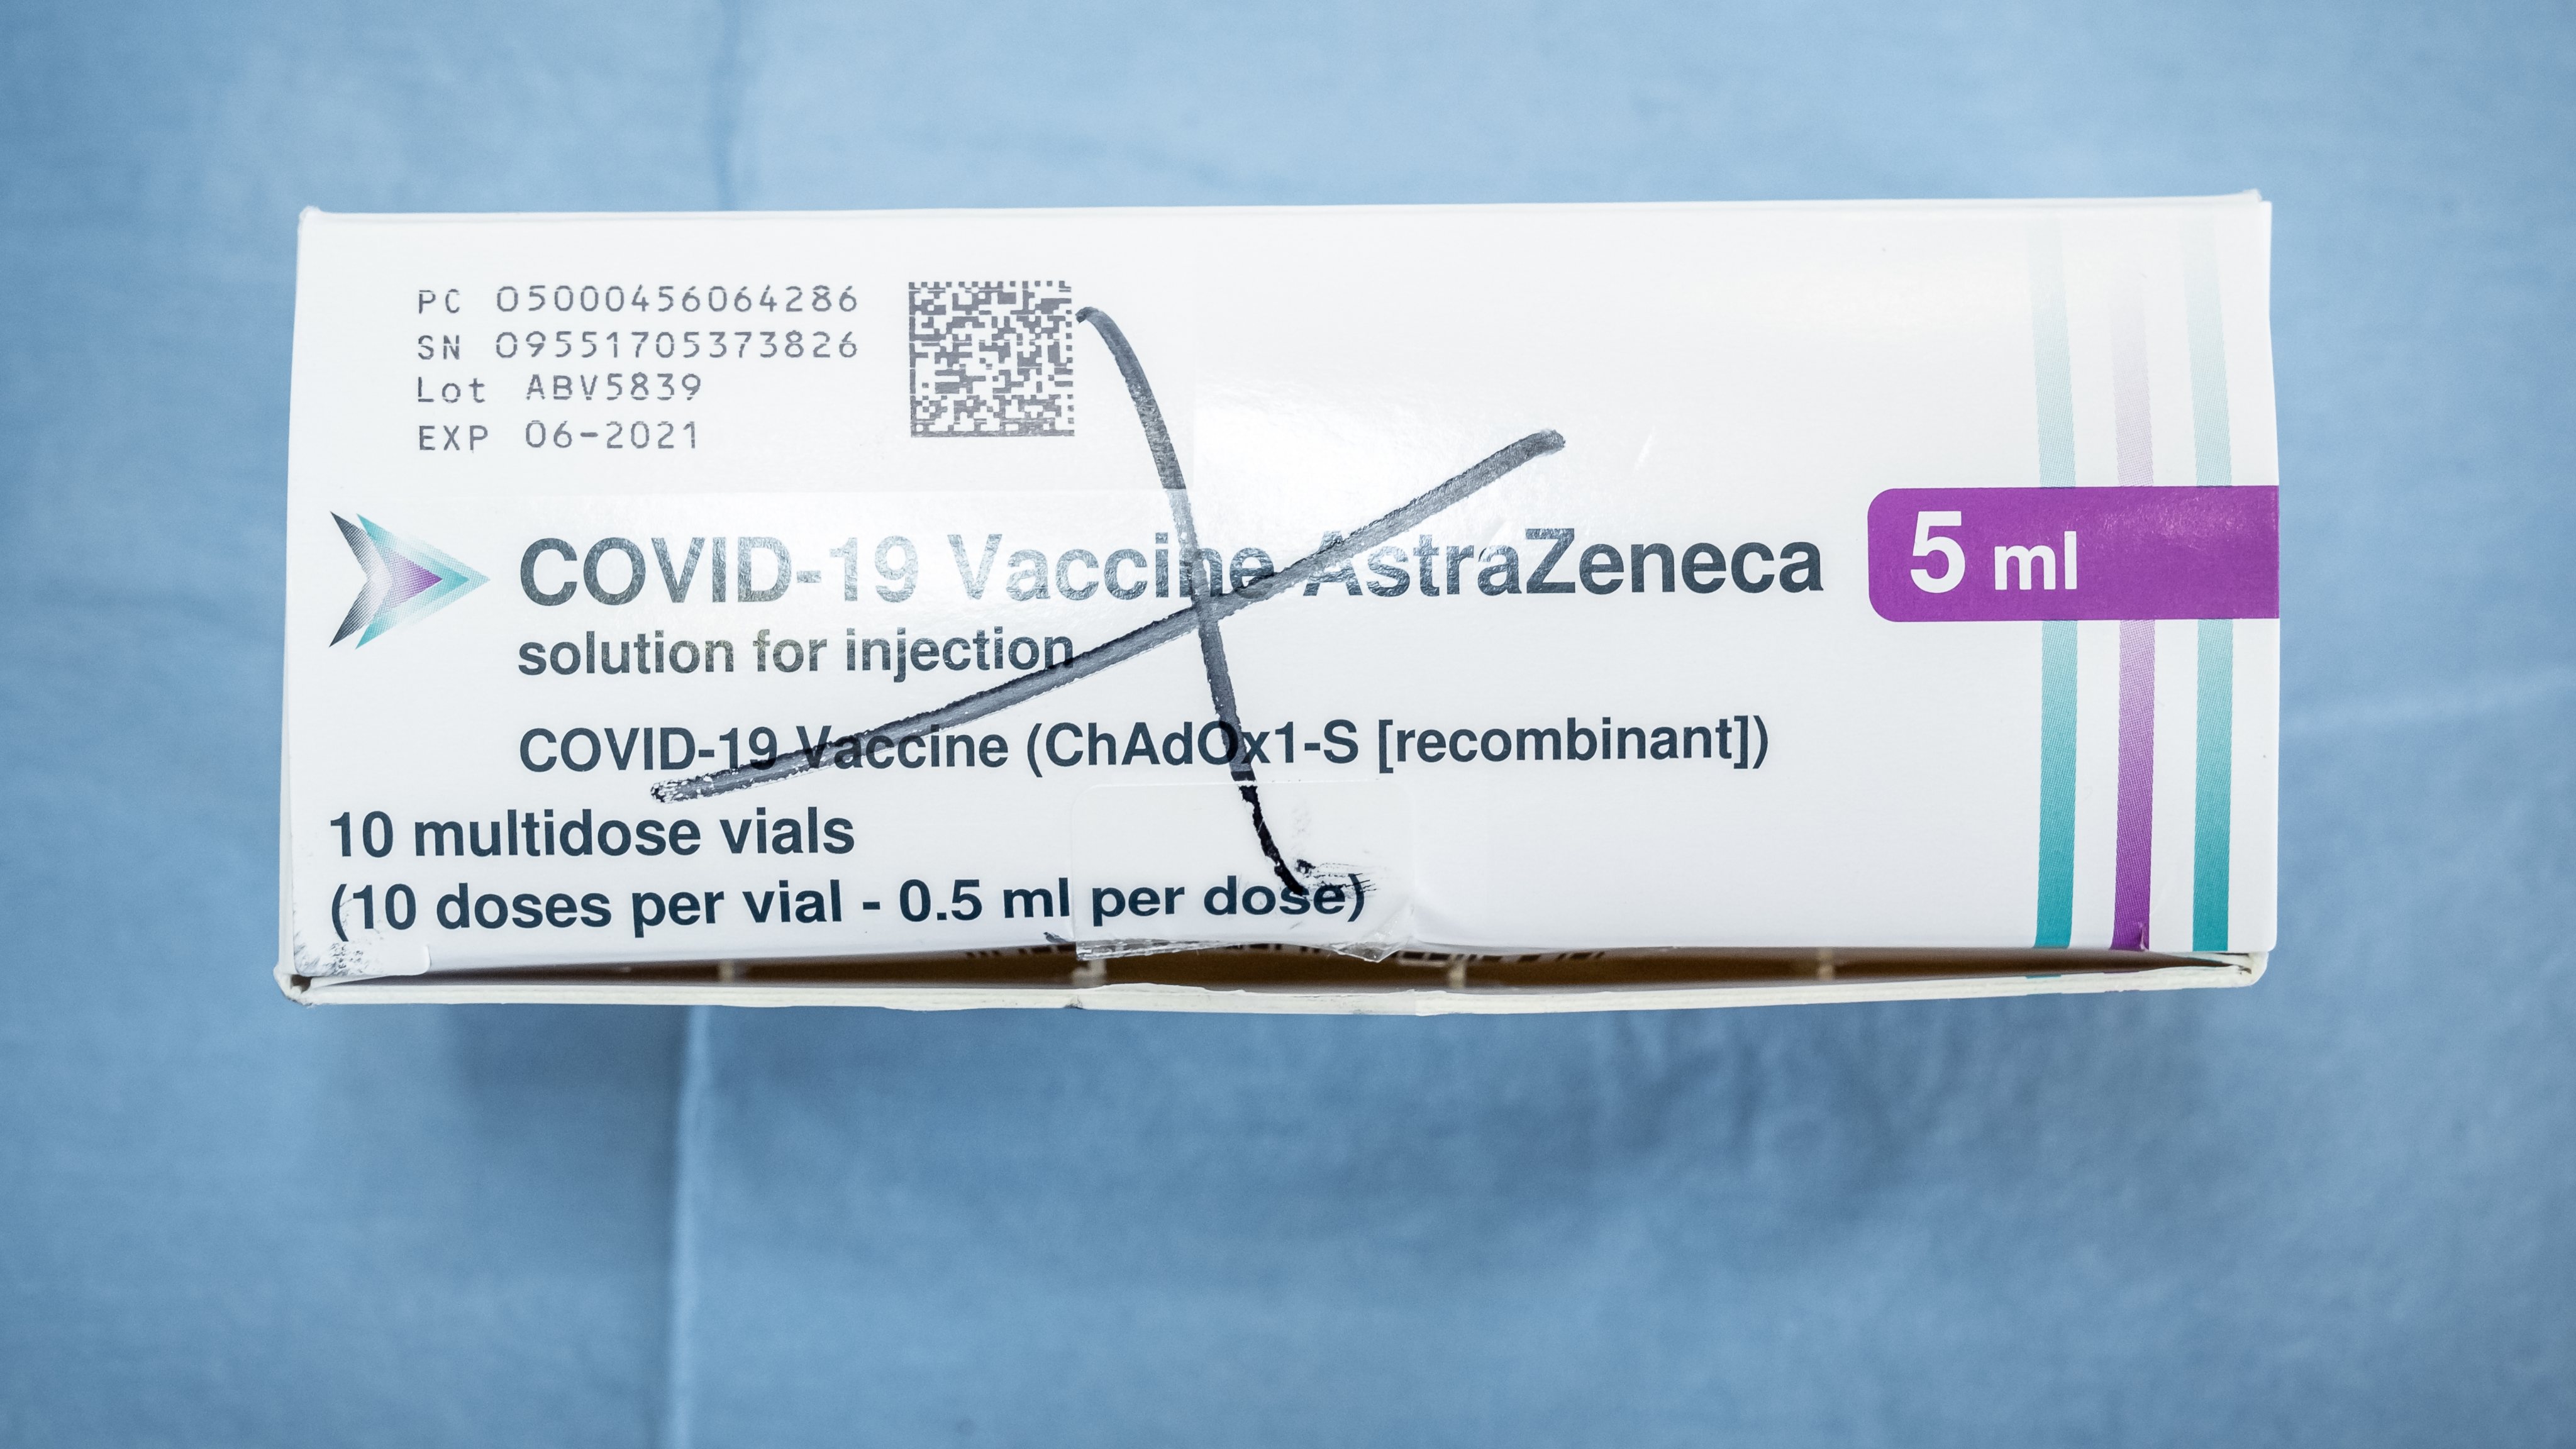 Covid-19 Vaccination in Italy&#039;s Naples